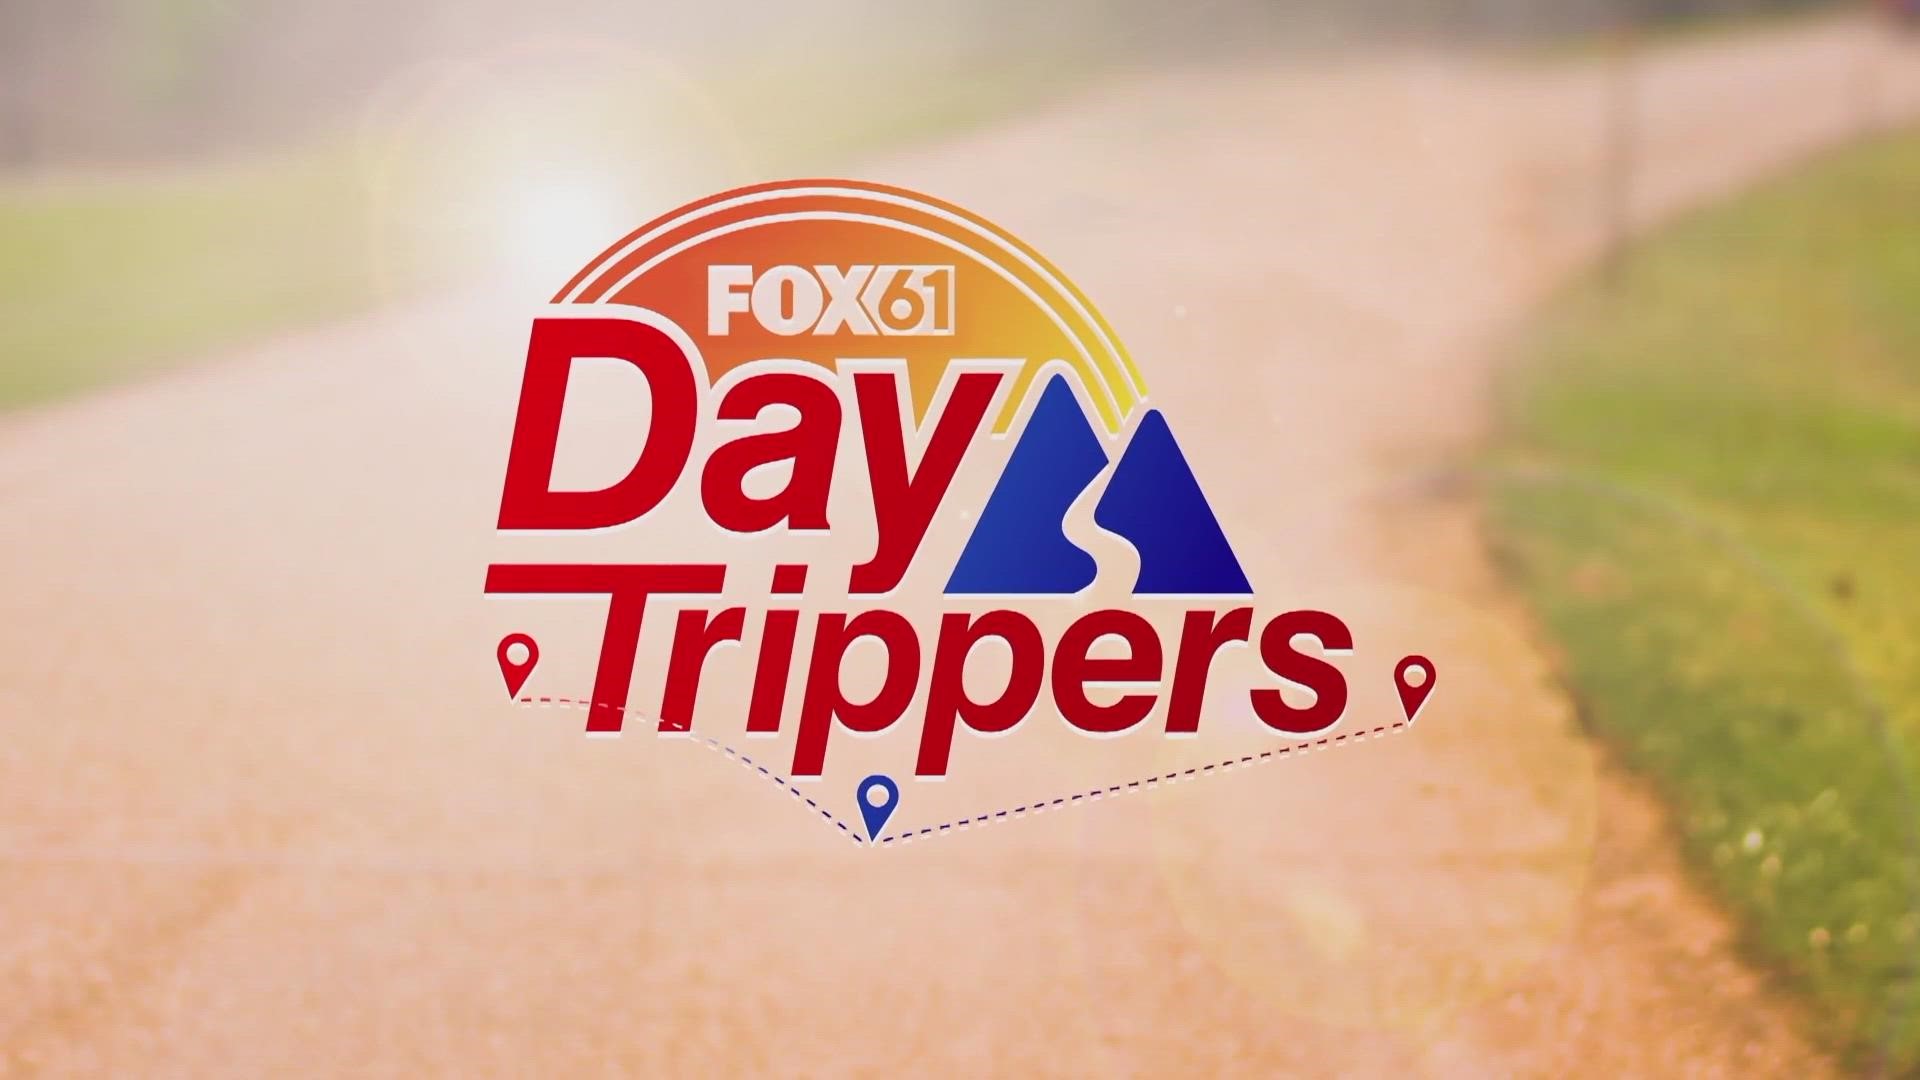 FOX61's Jimmy Altman is bringing back DayTrippers with stops in some great places in Connecticut.